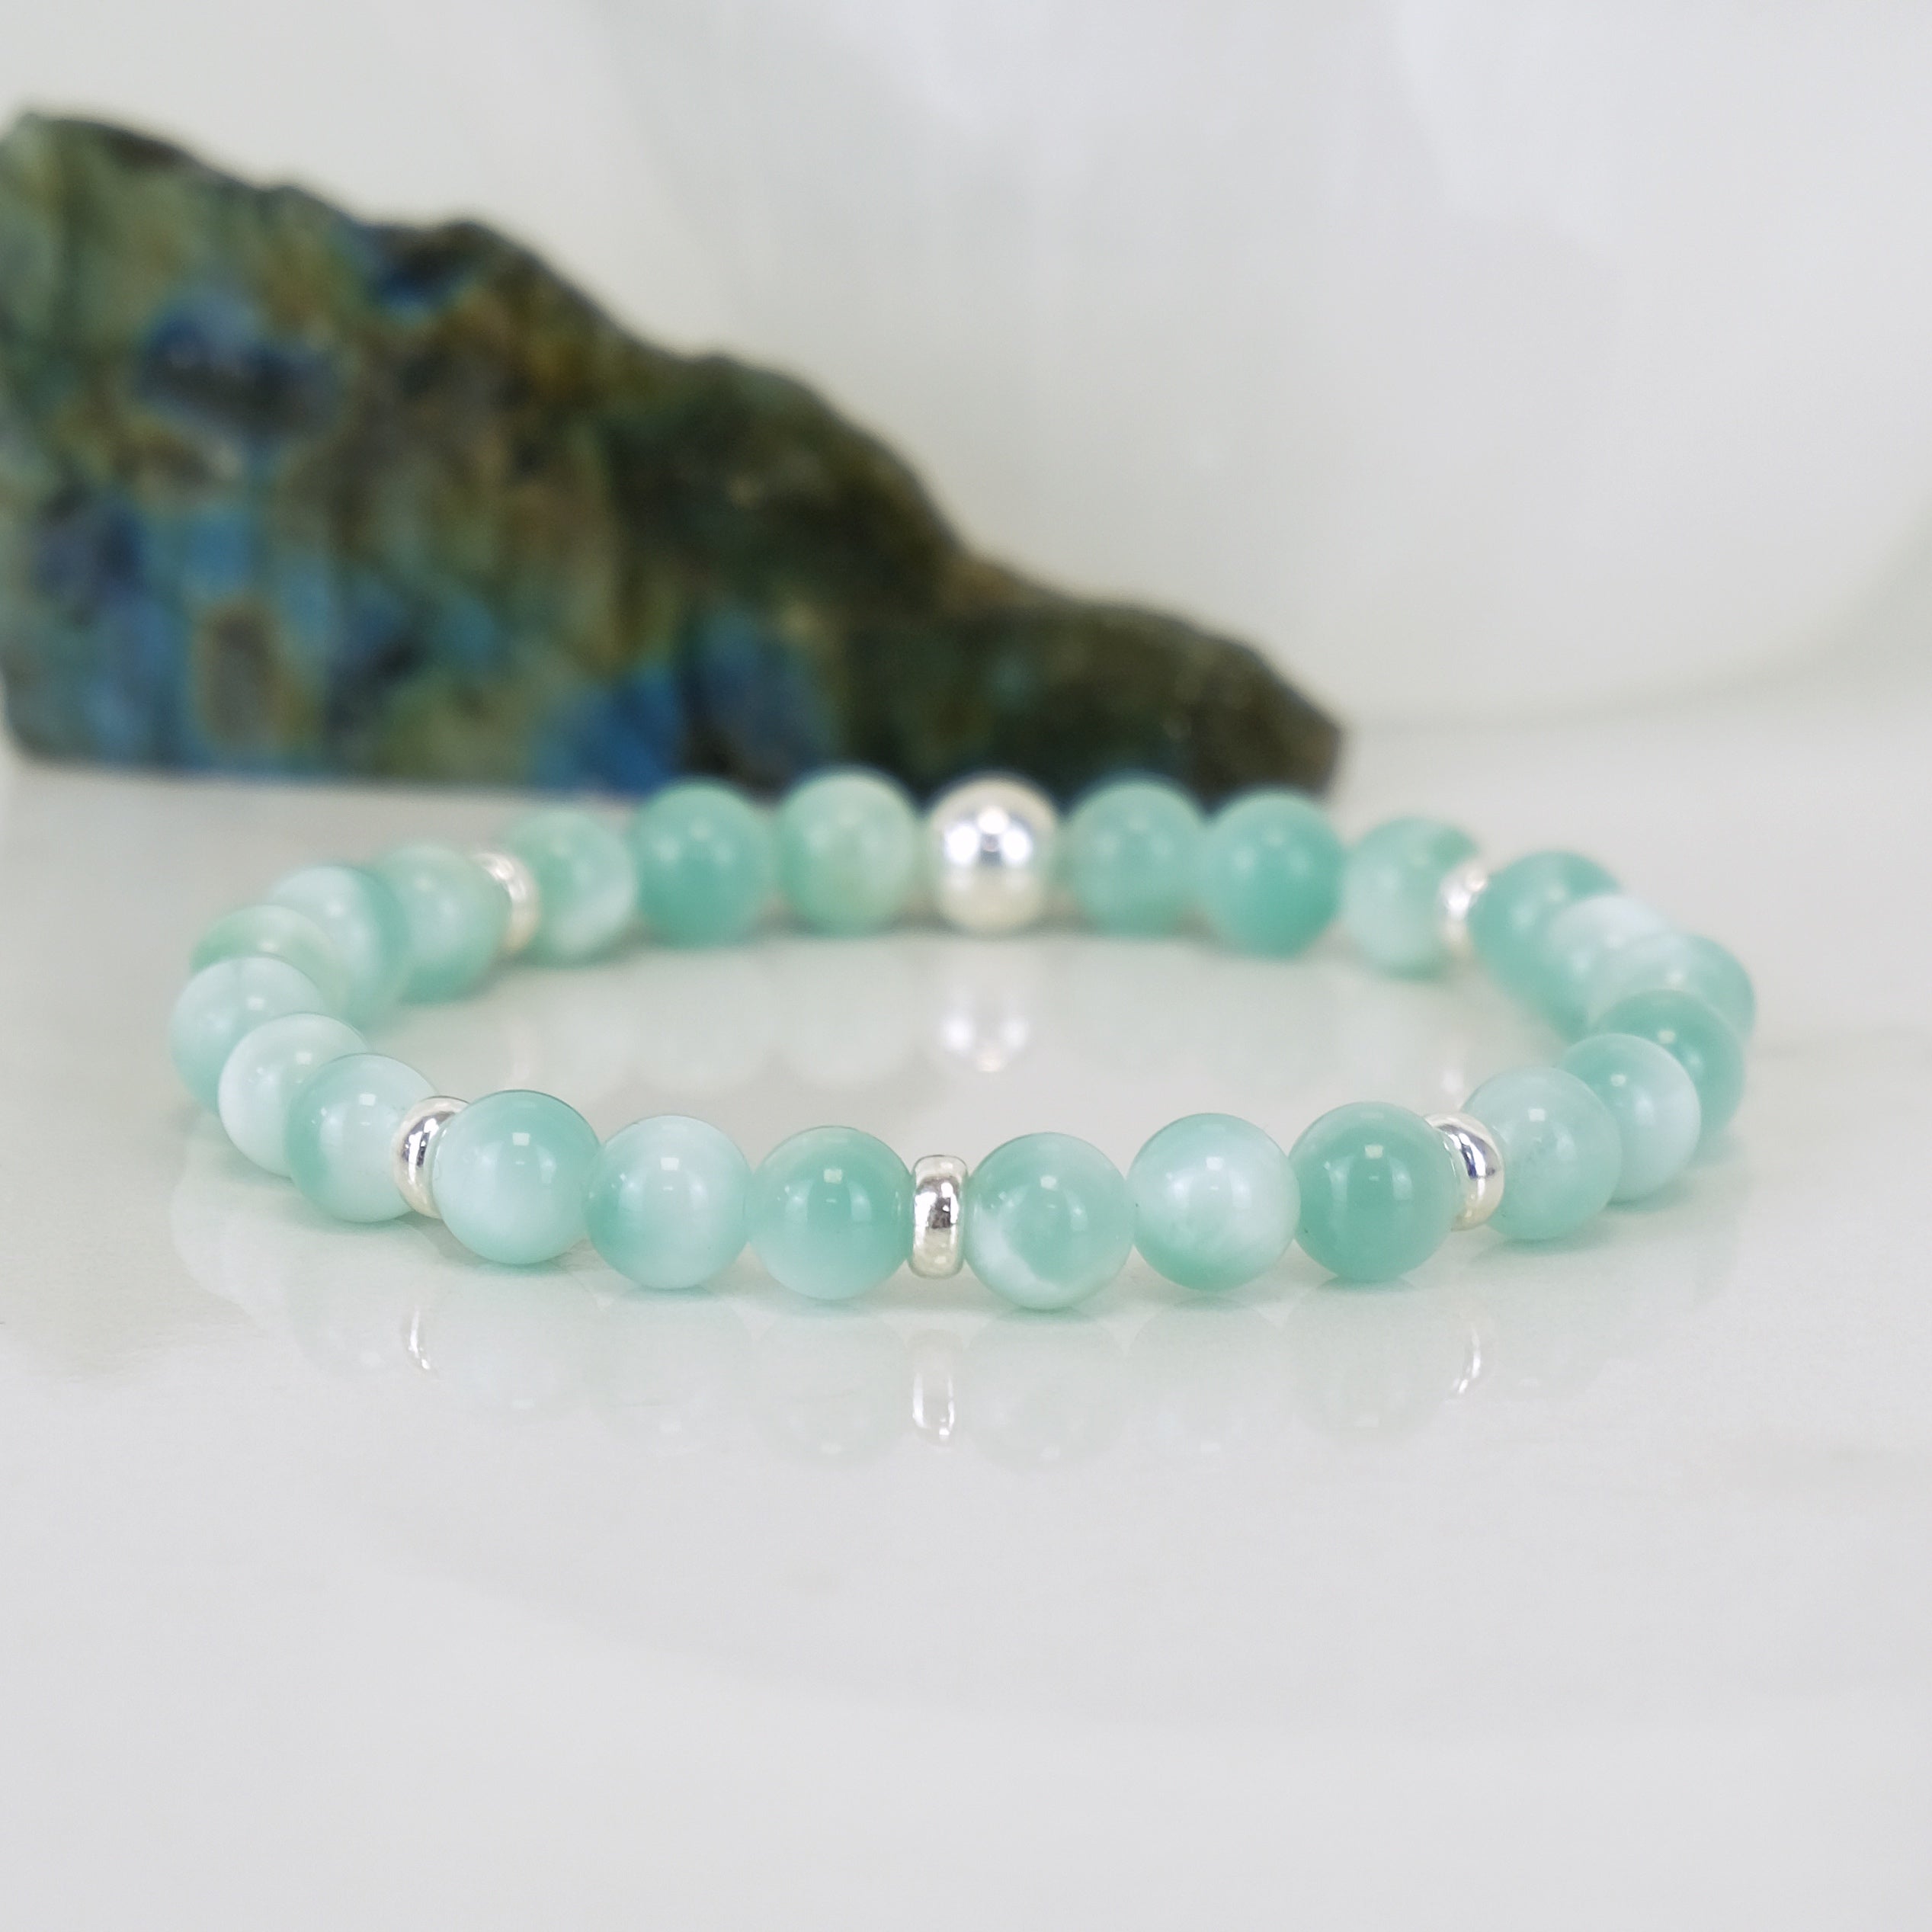 A green moonstone gemstone bracelet in 6mm with 925 sterling silver accessories